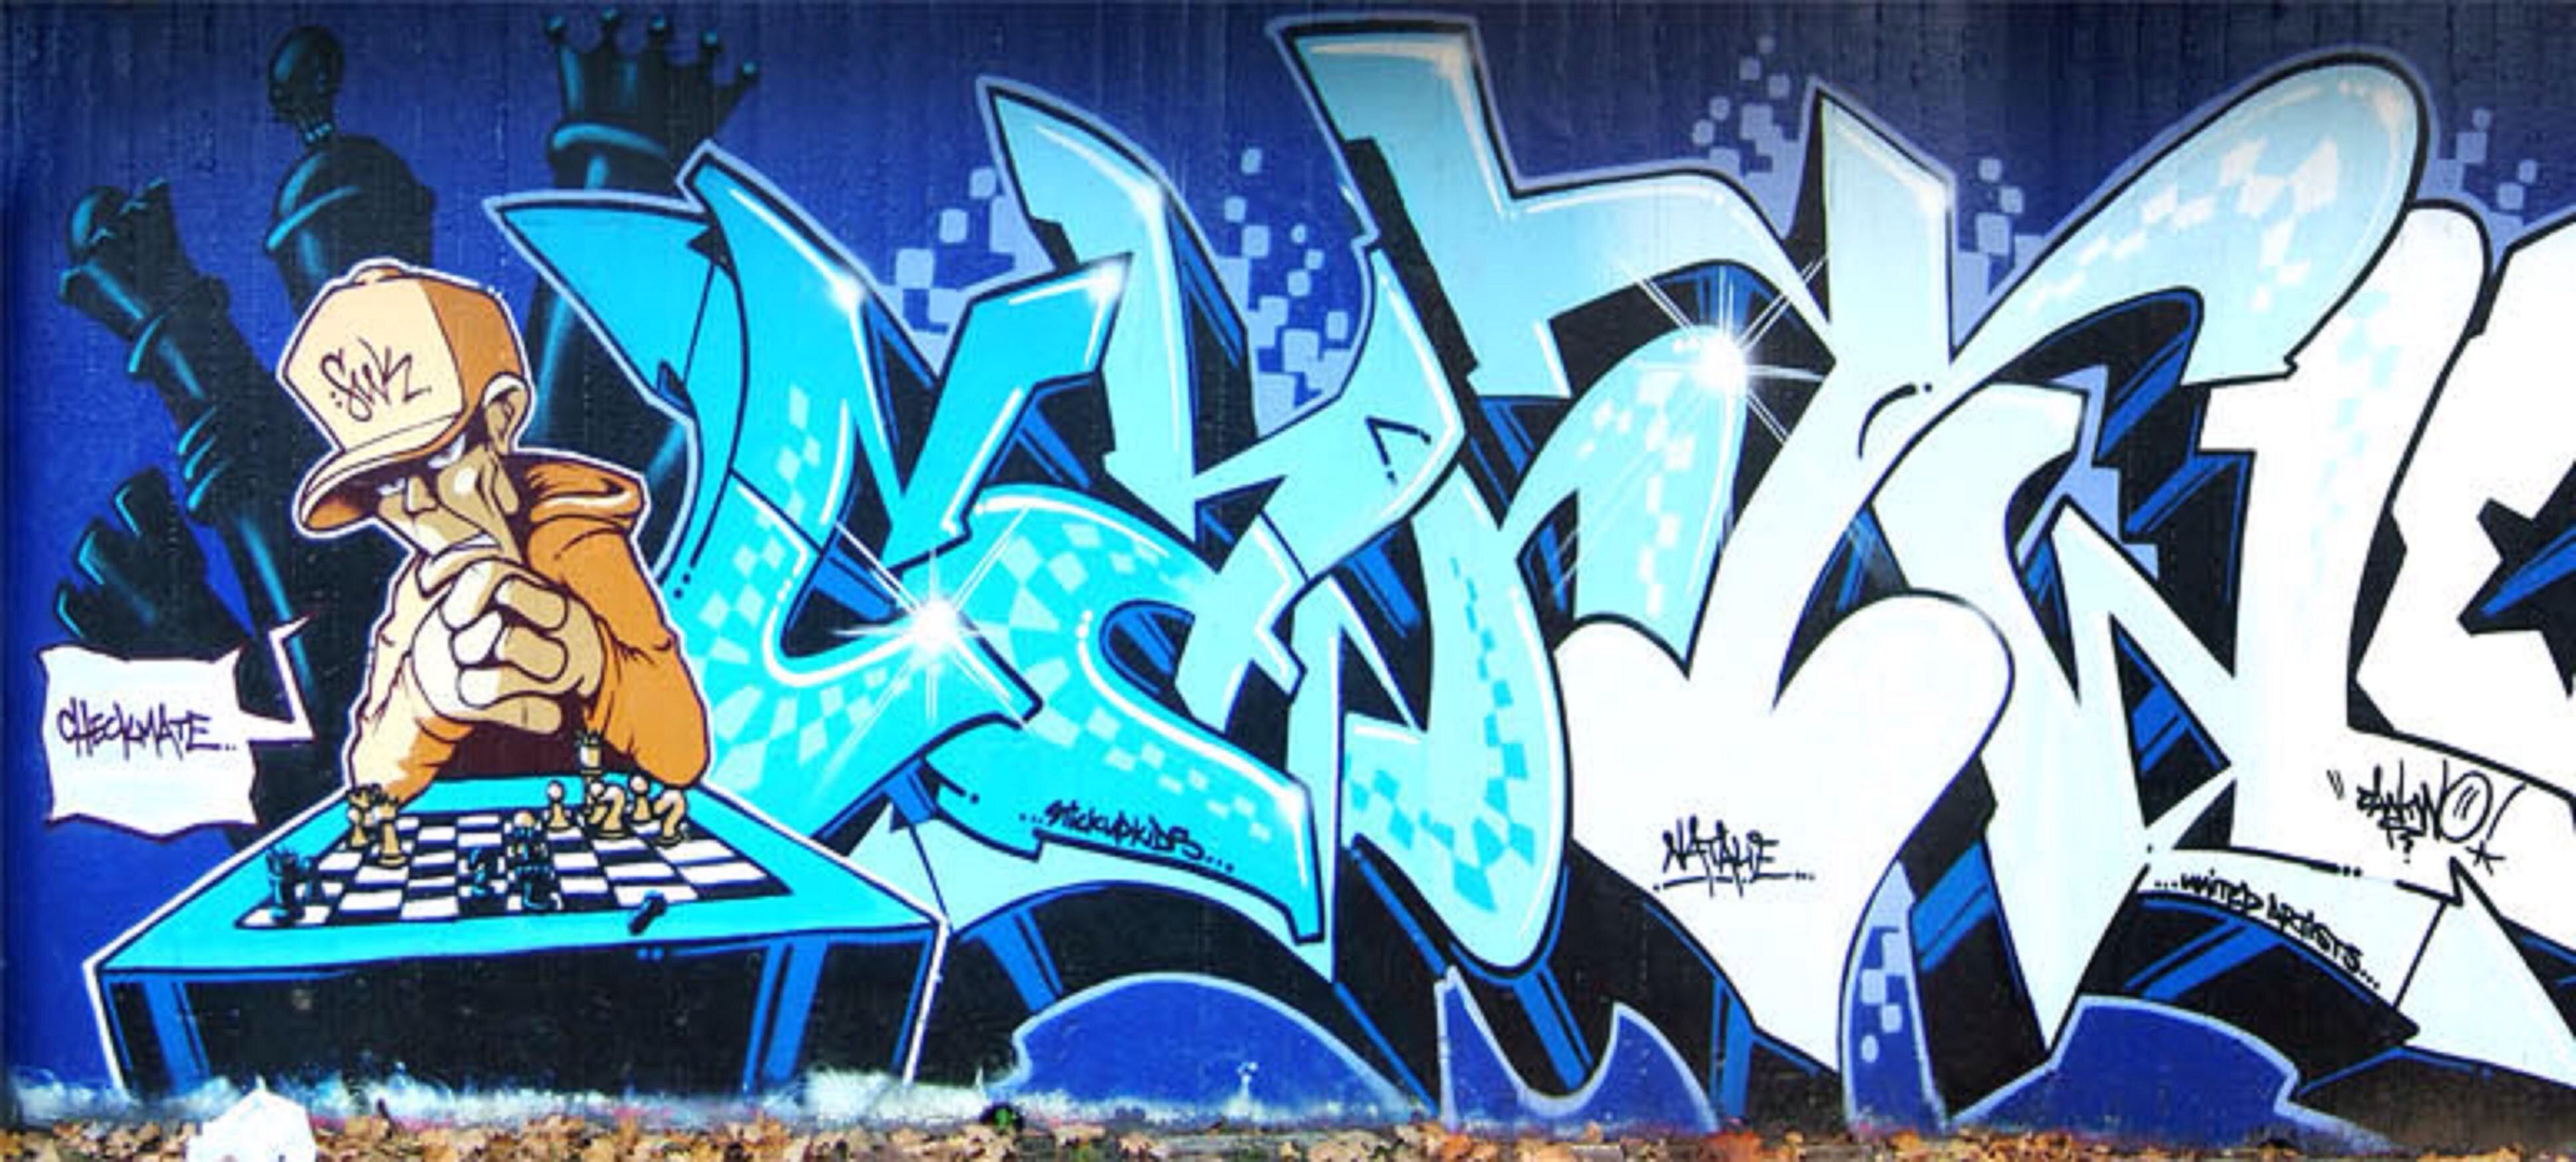 Detail Graffiti Cantwo Nomer 5